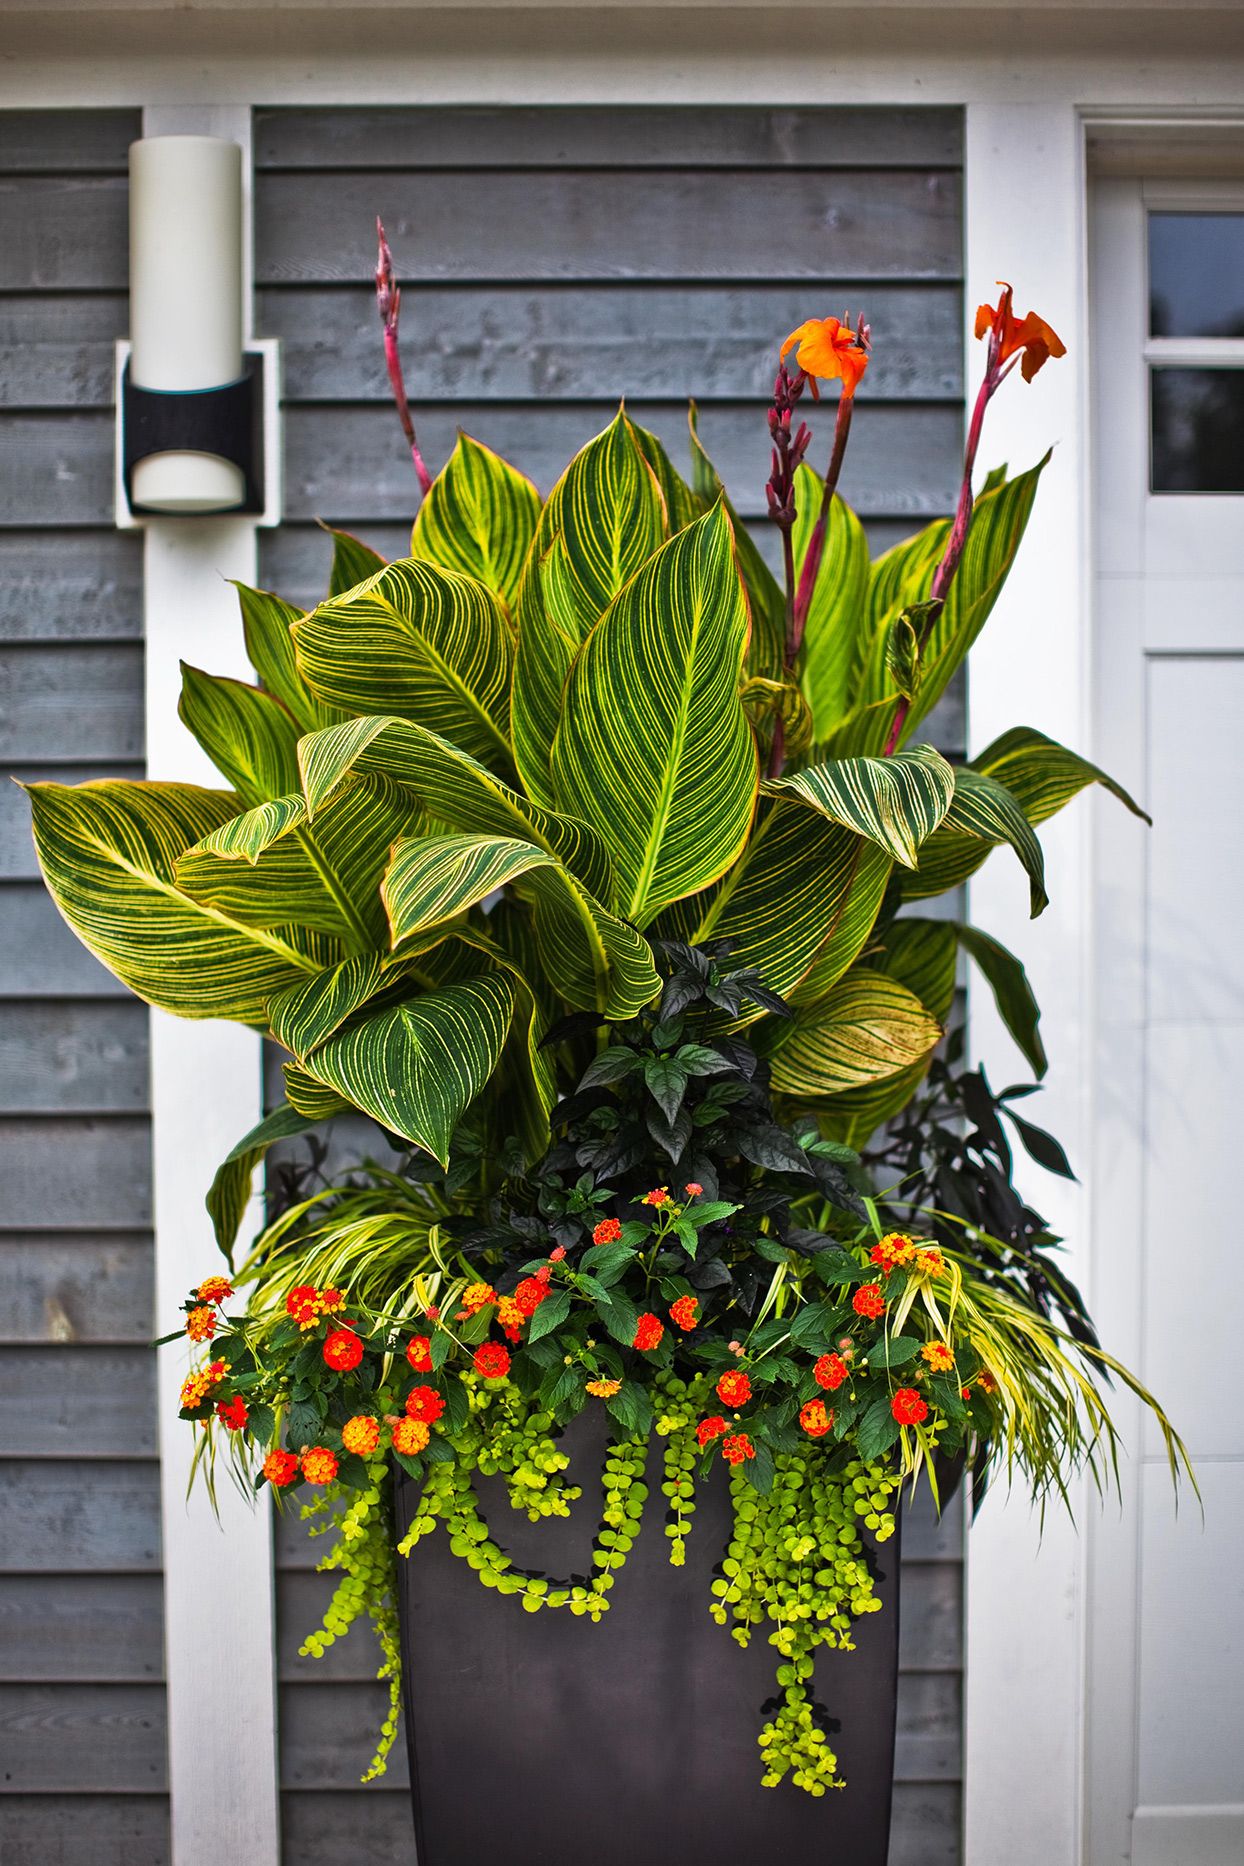 Growing Plants in Small Spaces: The Beauty of Container Gardening